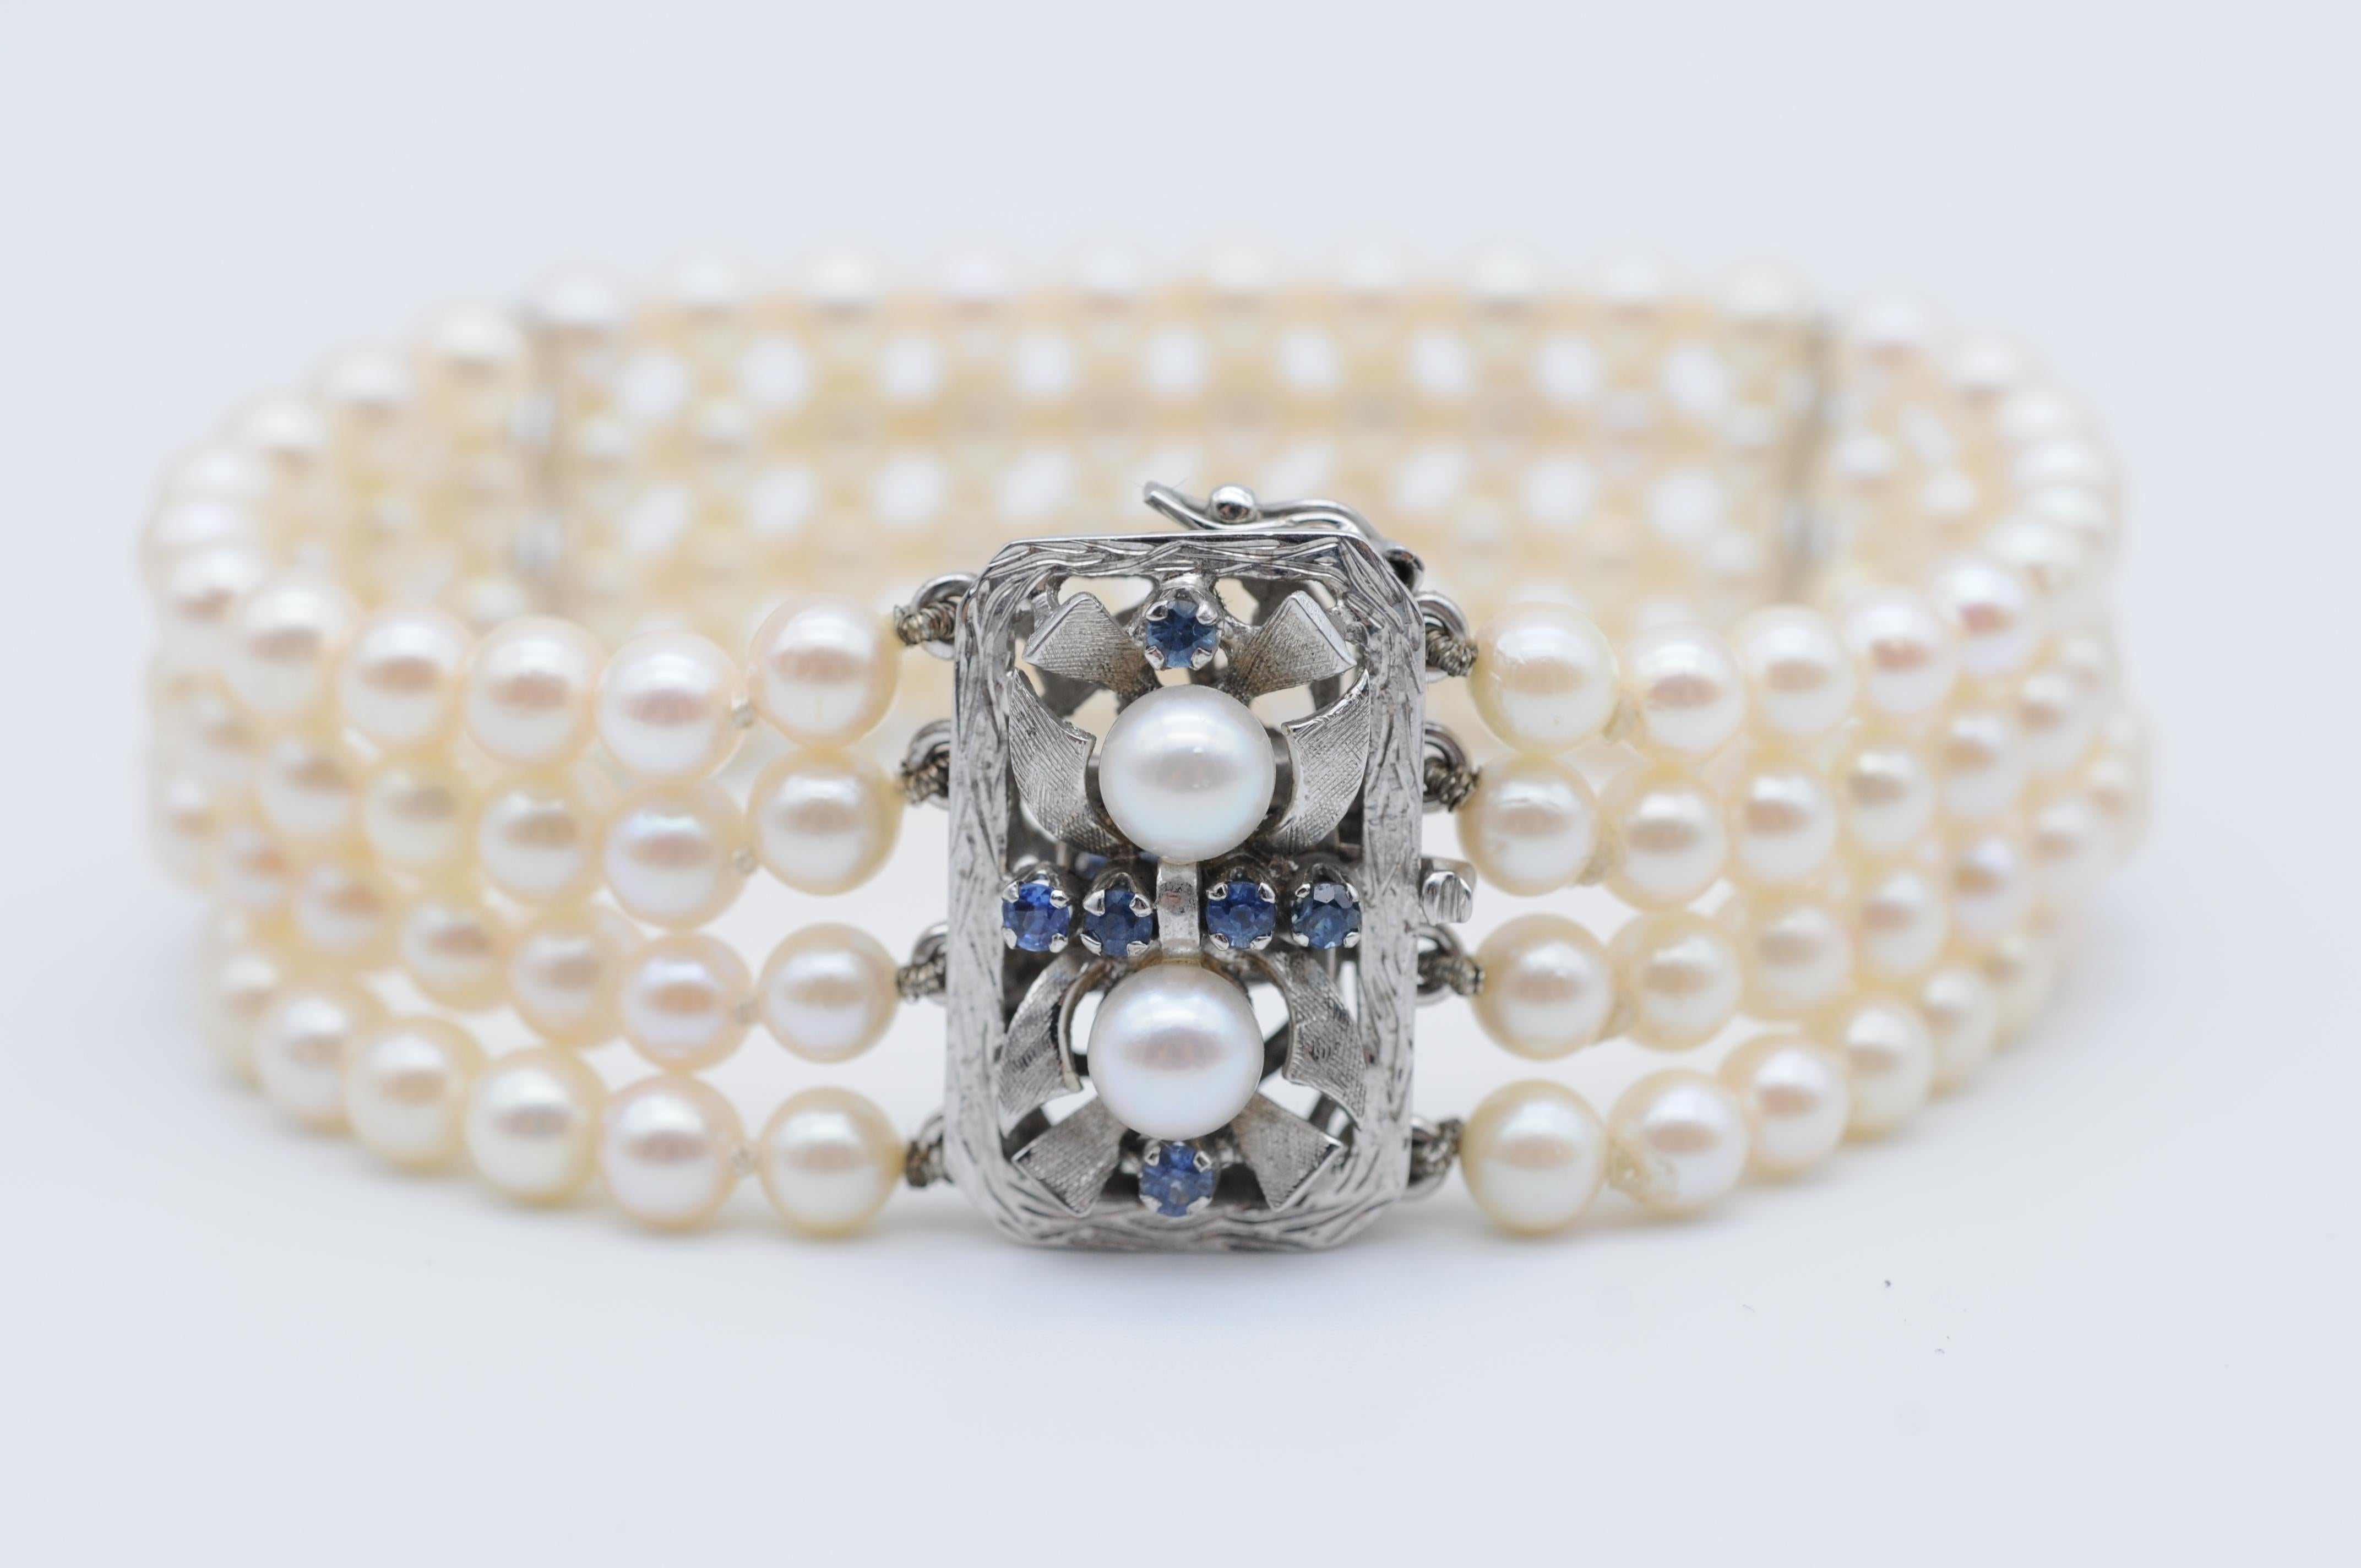 Indulge in the timeless elegance of this beautiful Pearl Bracelet, crafted from lustrous pearls arranged in a symmetrical four-row form. The gleaming white pearls have been carefully selected and strung together to create a stunning piece that